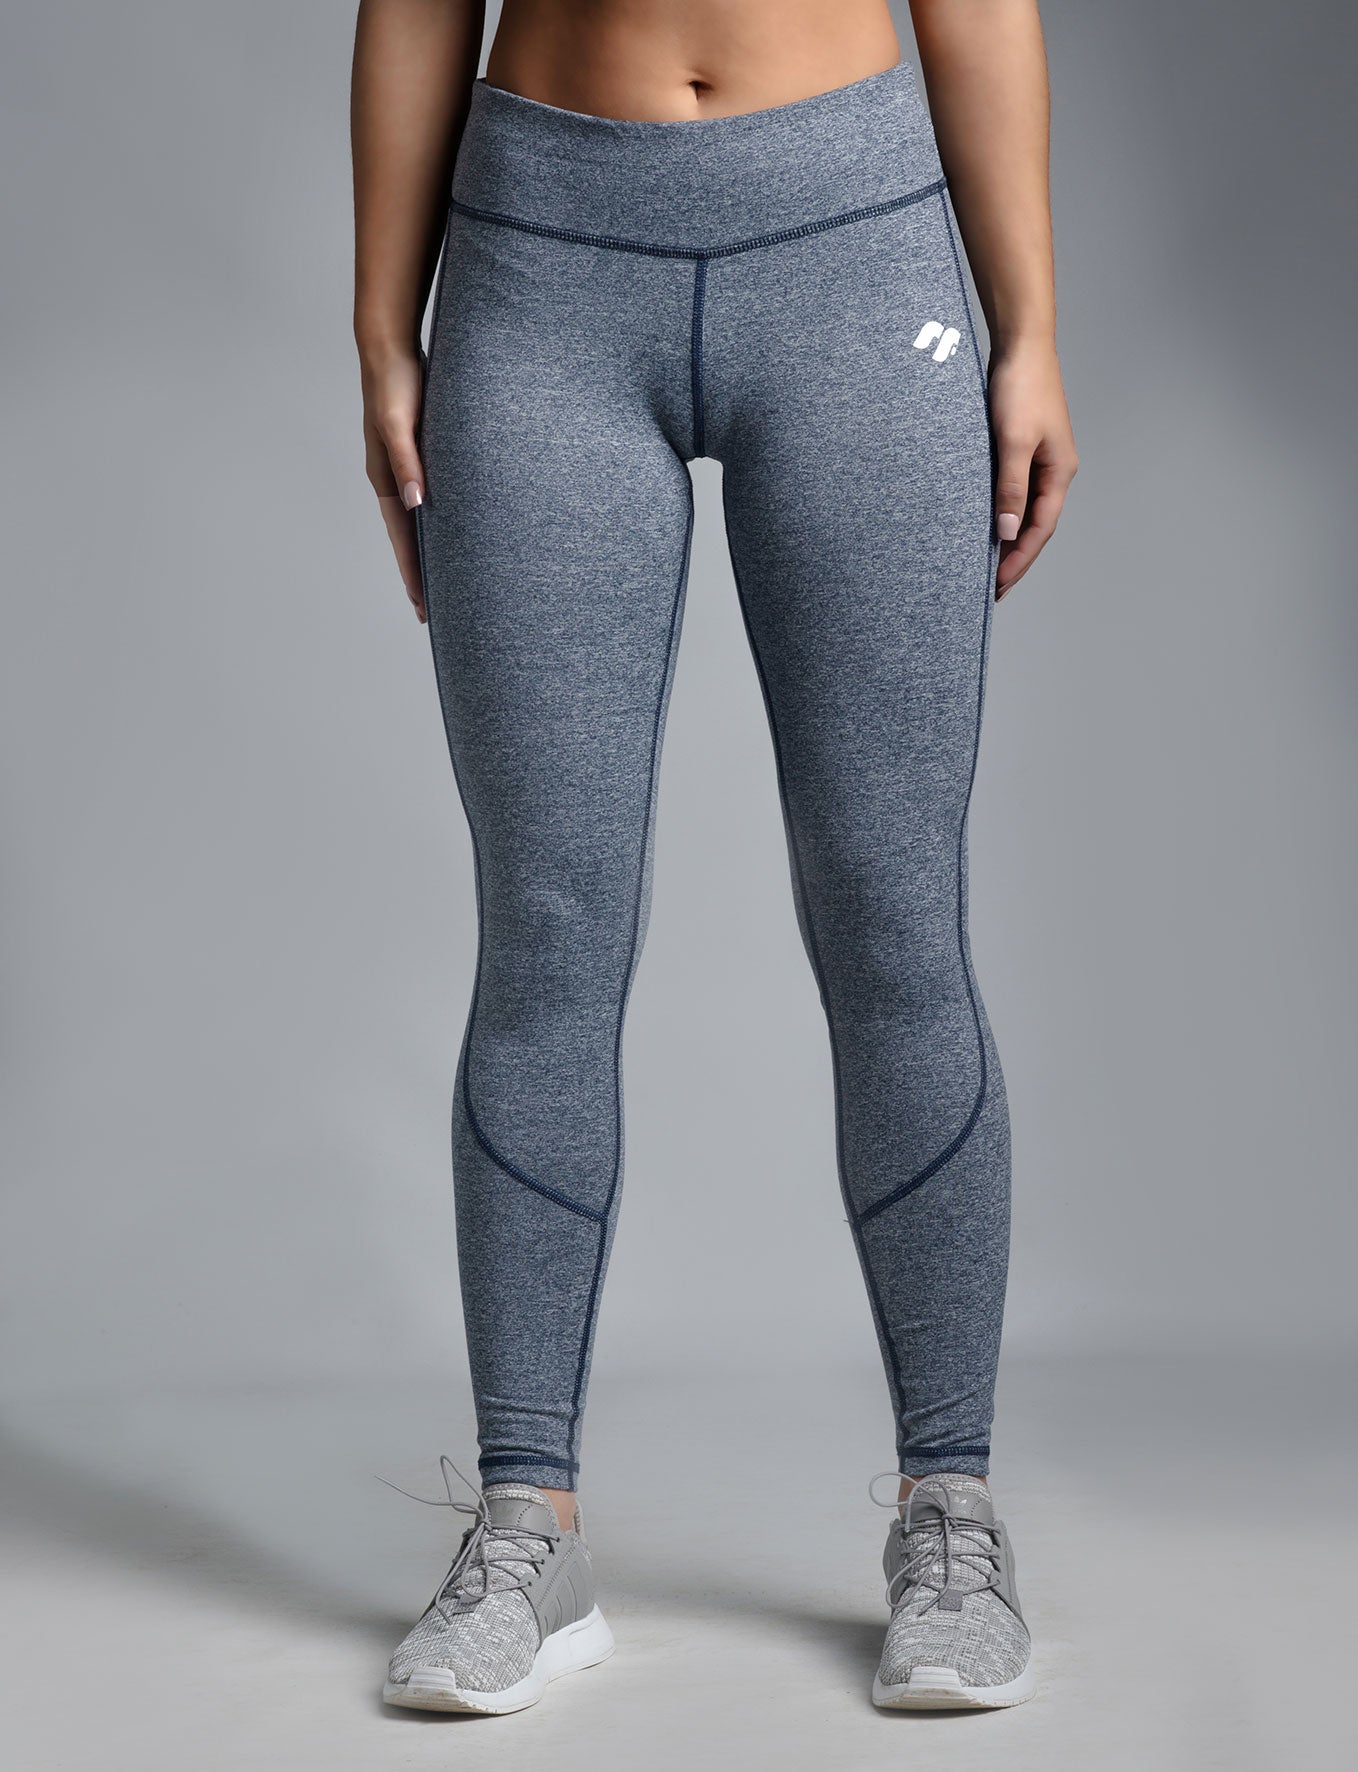 Ankle-length and high-waisted leggings without side seams for a